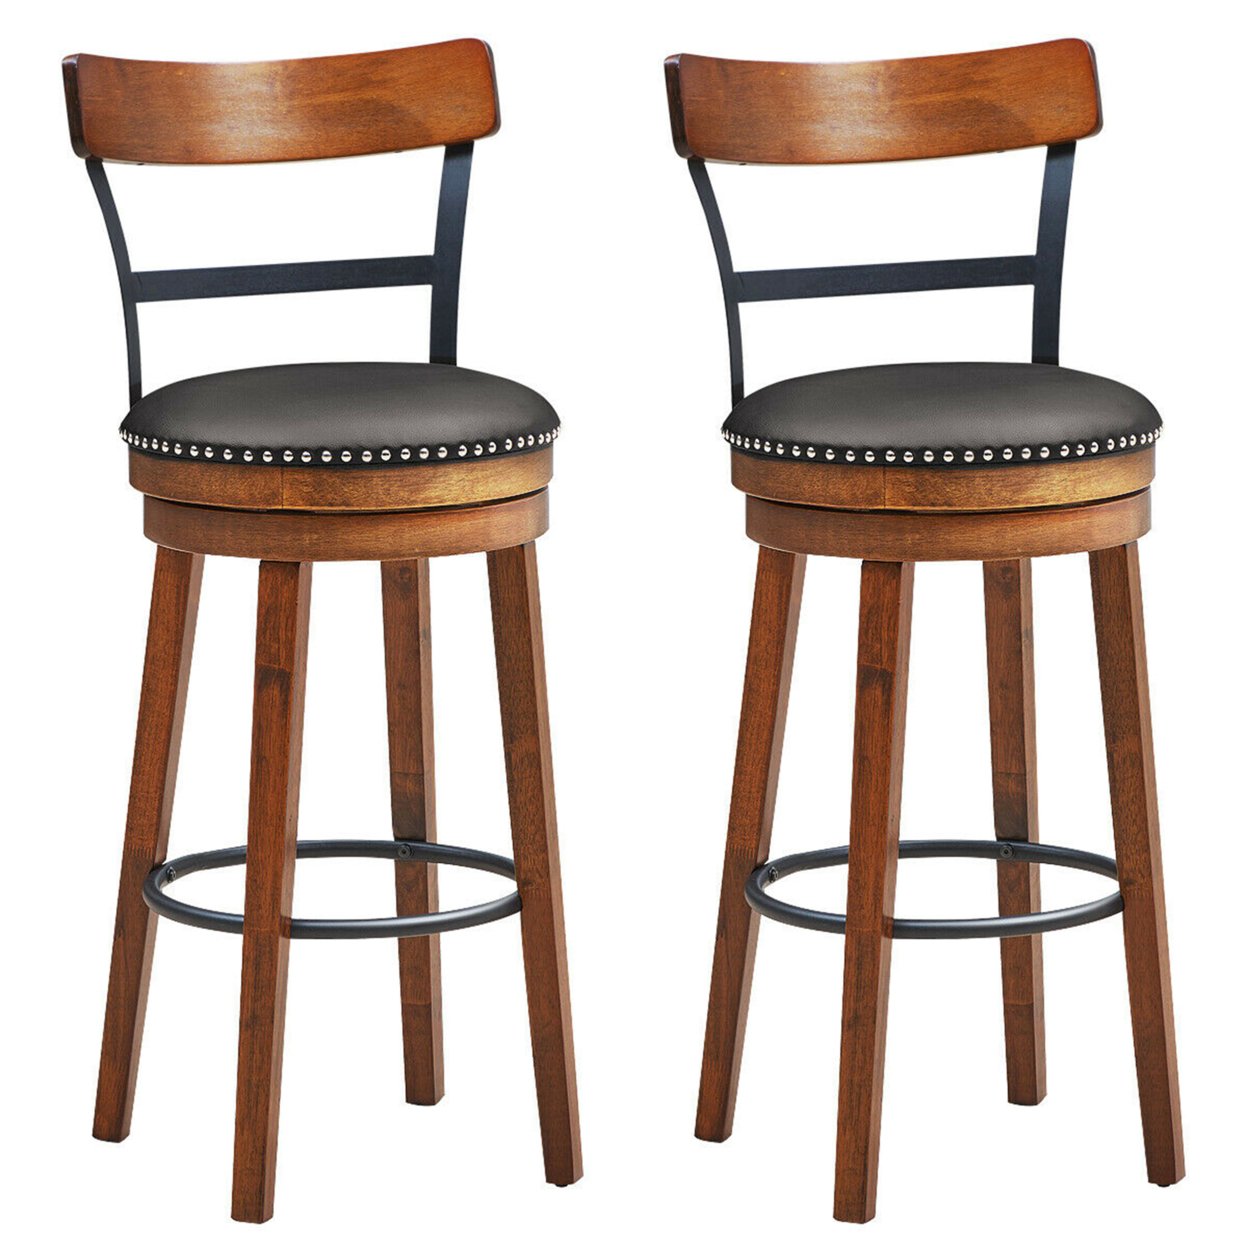 Set Of 2 BarStool 30.5'' Swivel Pub Height Dining Chair With Rubber Wood Legs